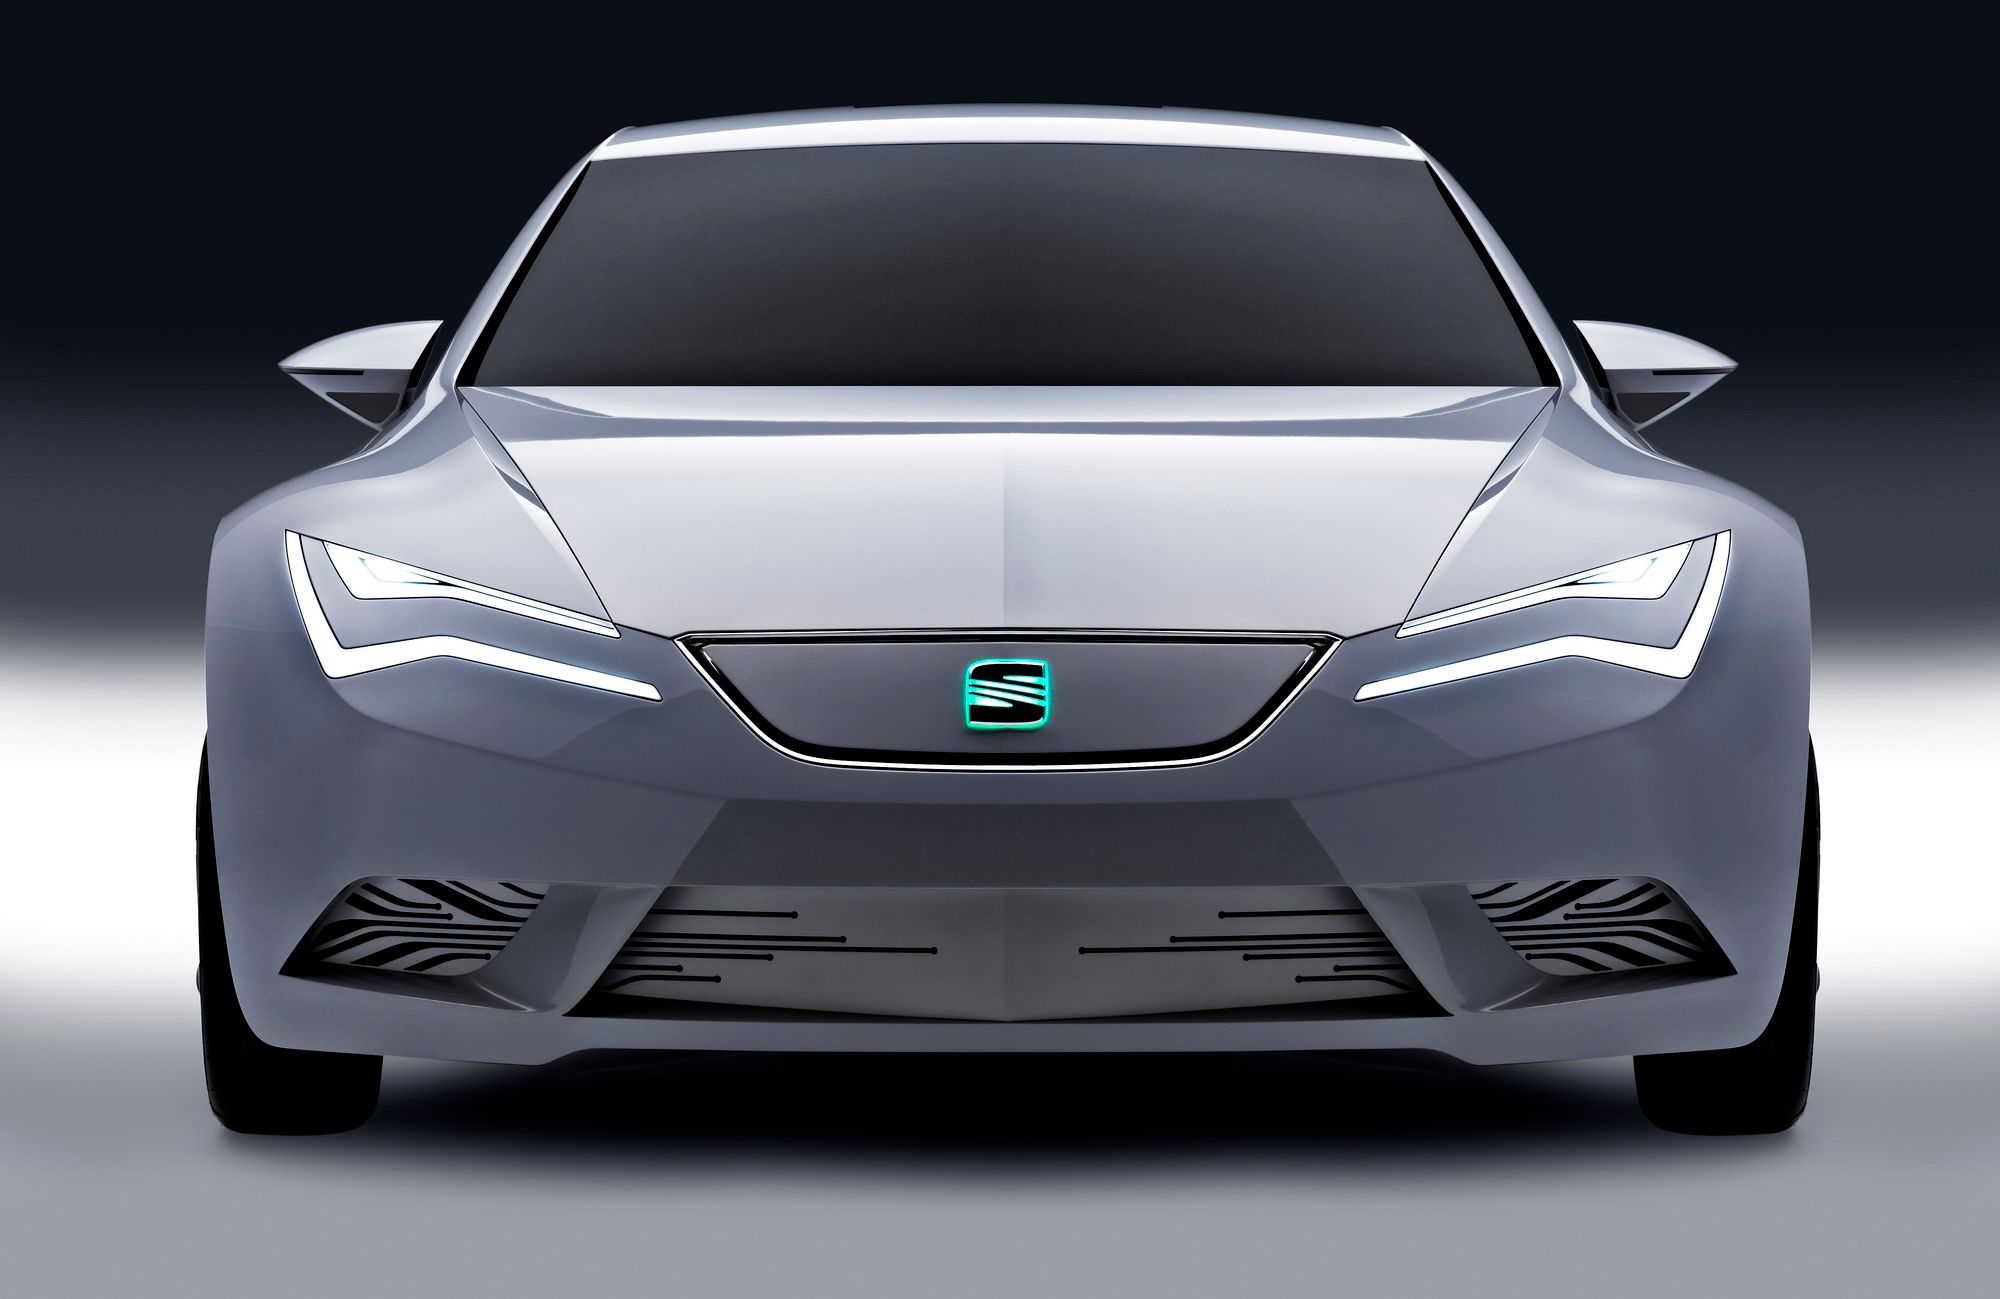 2010 Seat Ibe Concept